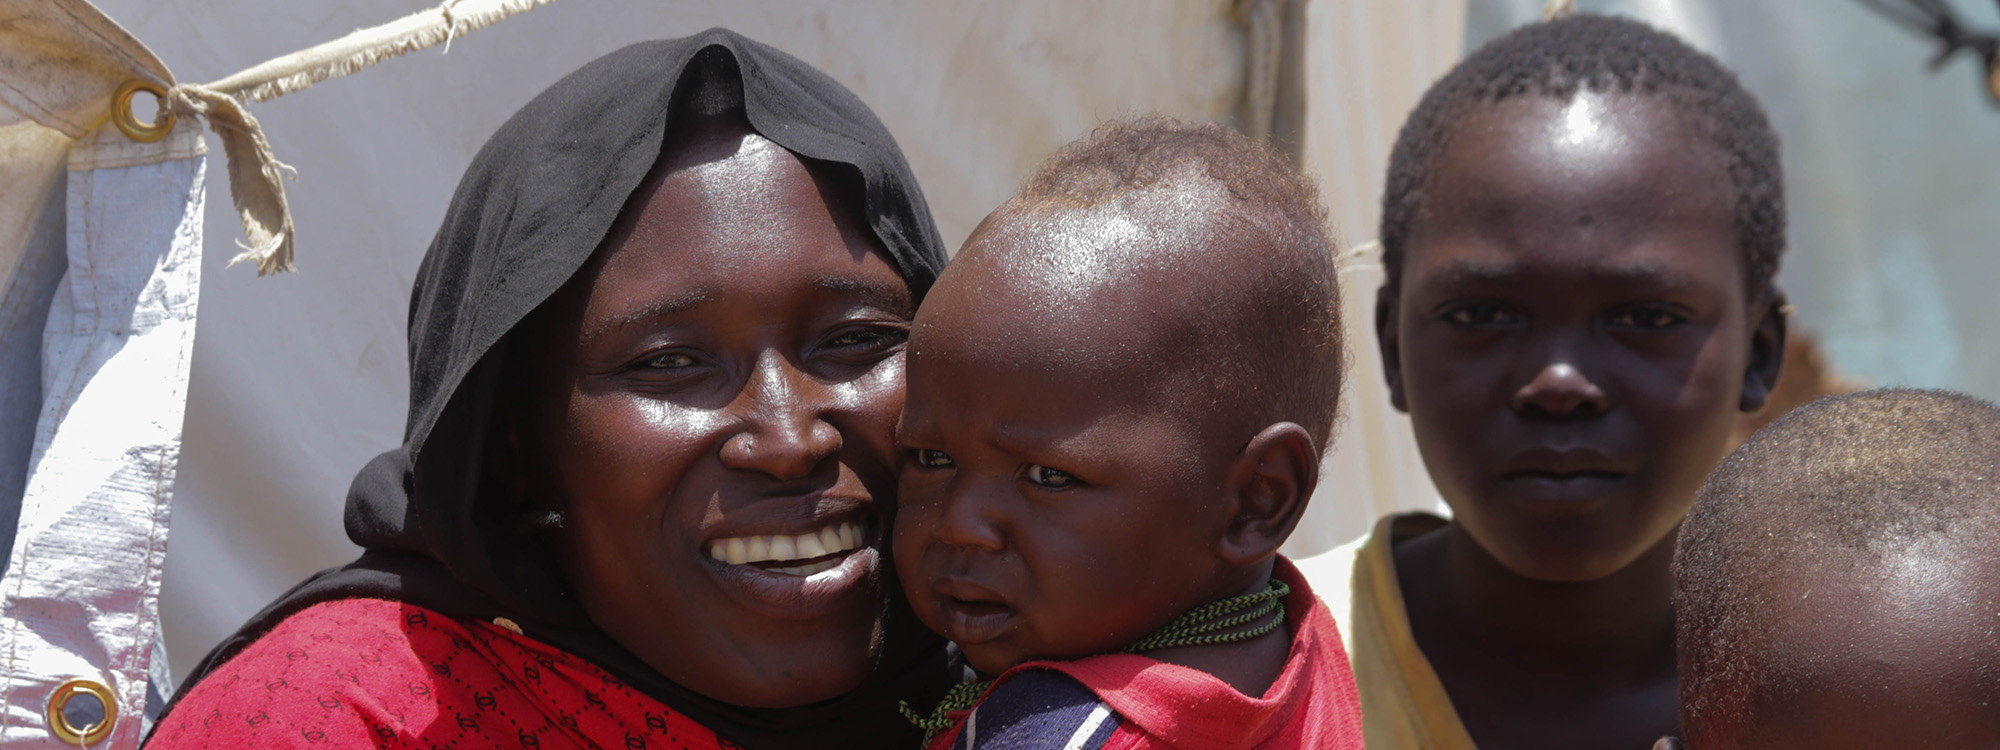 Woman smiling and holding a child in Chad